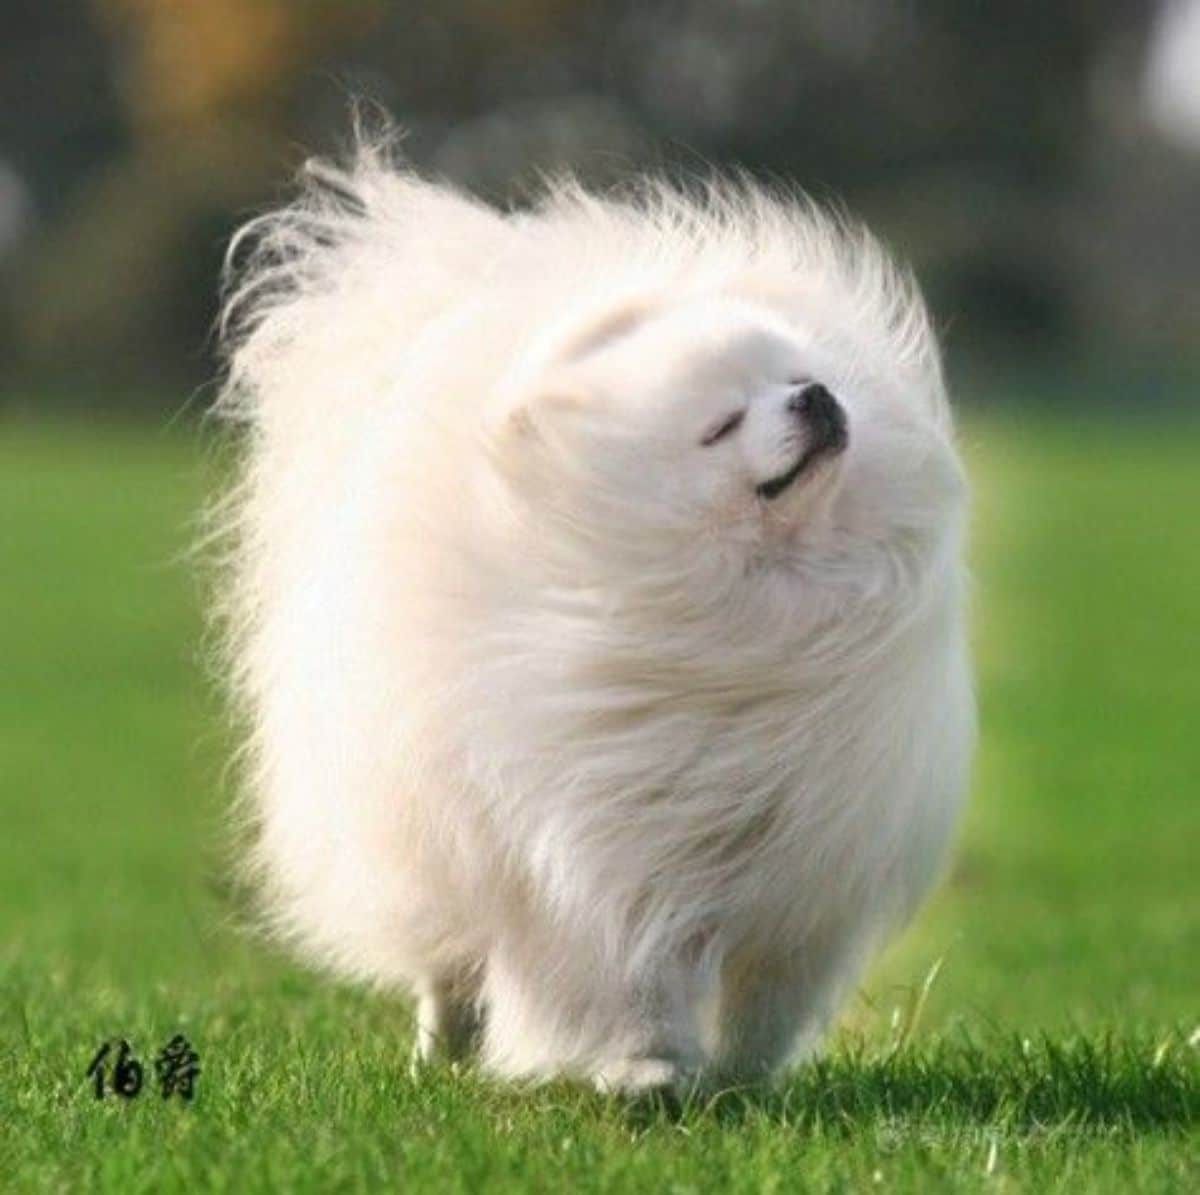 fluffy white dog standing on grass with the fur moving in the wind